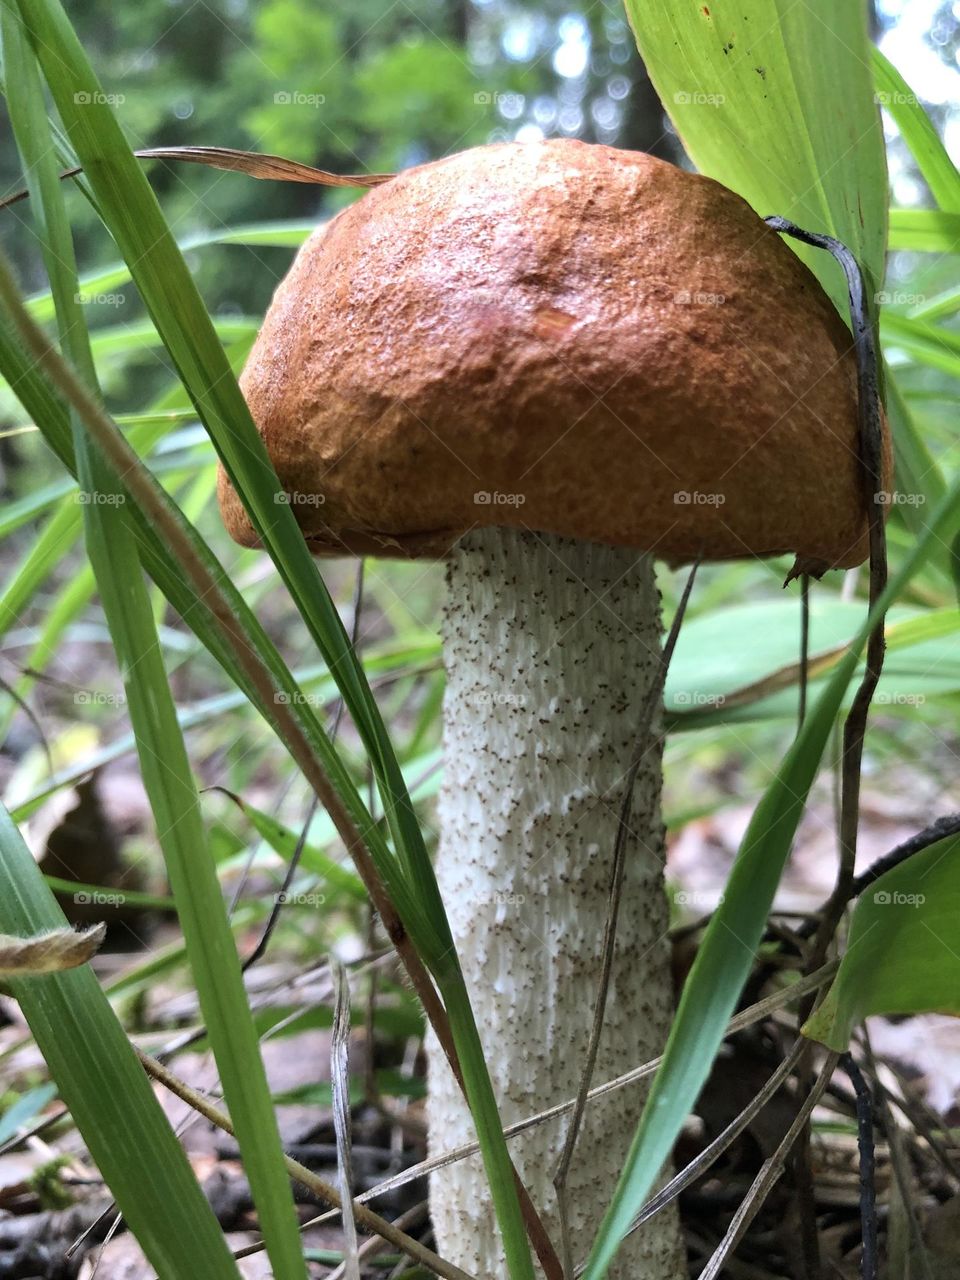 Brown mushroom growing in the forest